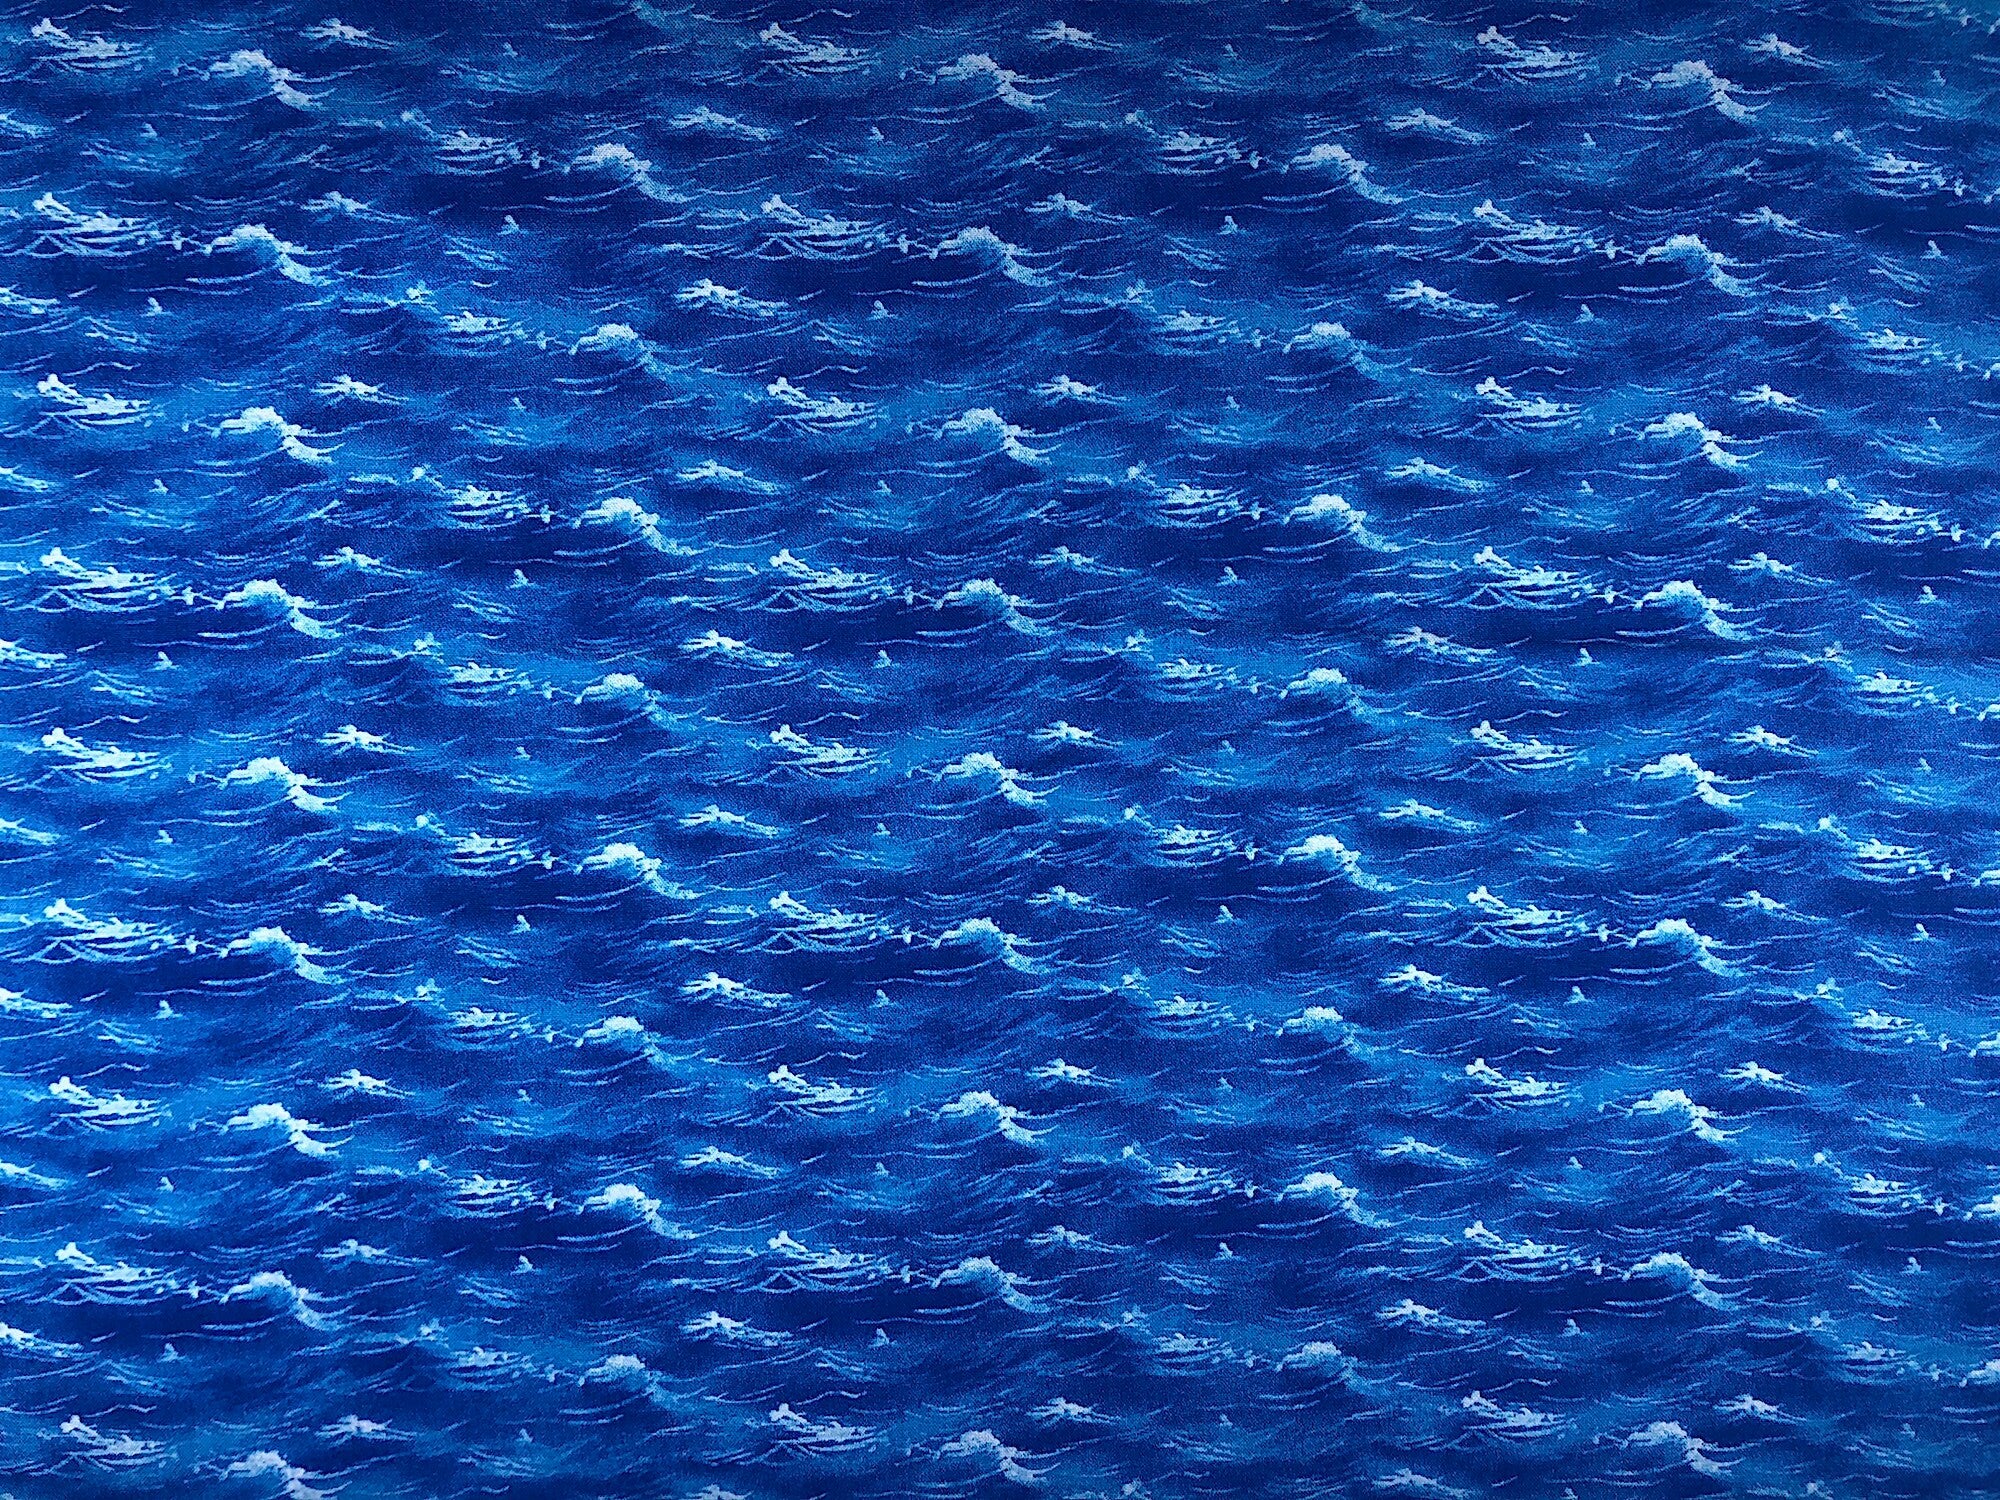 This blue fabric has white peaks as if you are looking out over the water.